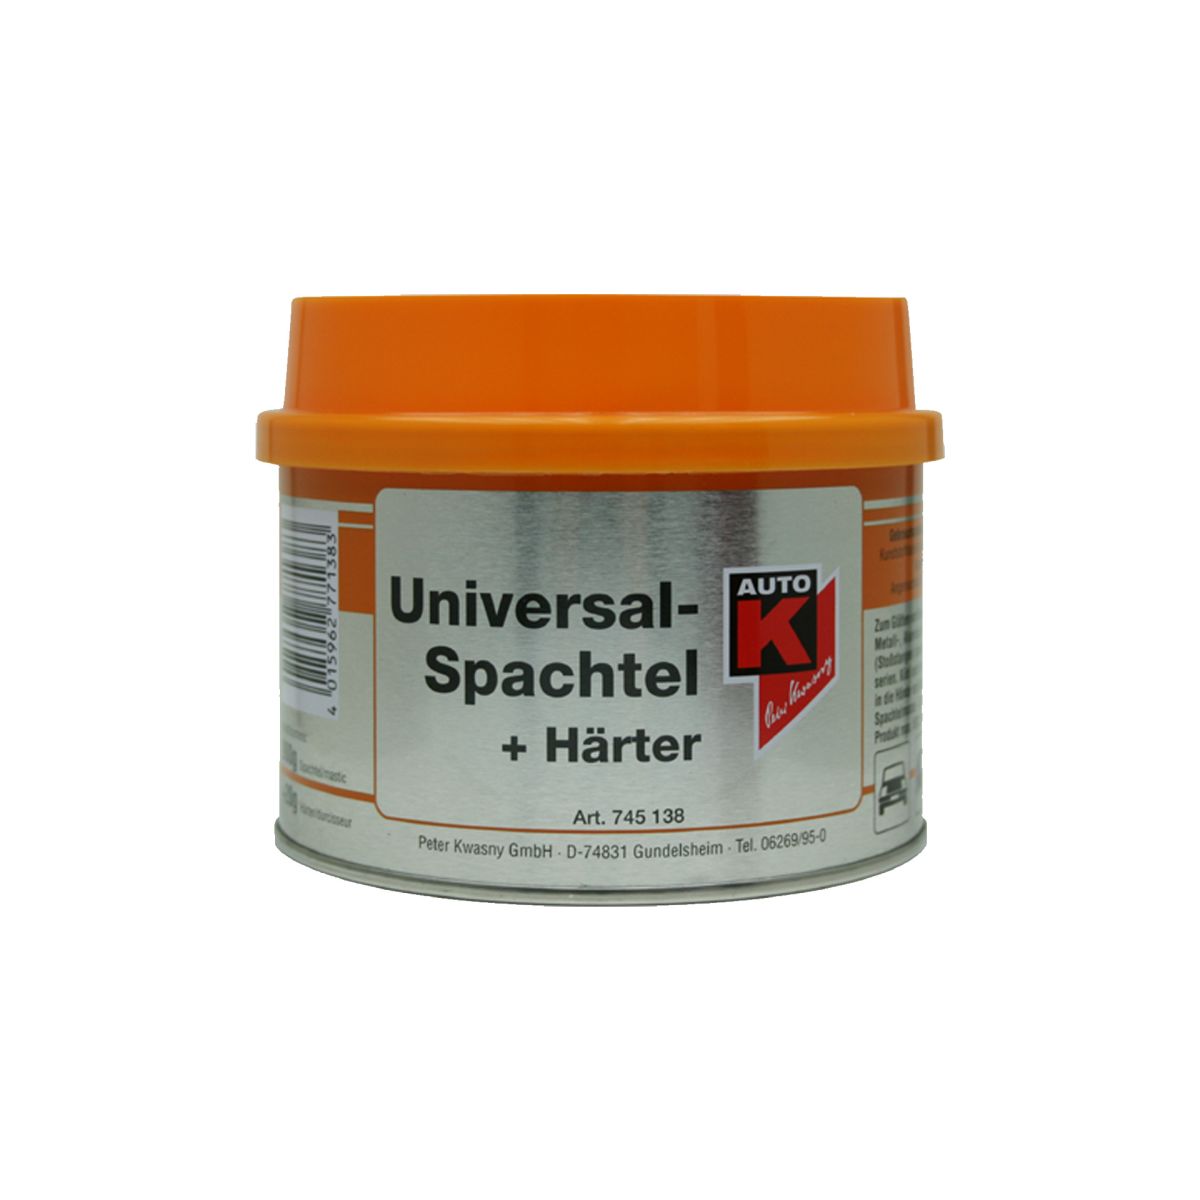 Universal filler is suitable for smoothing over...